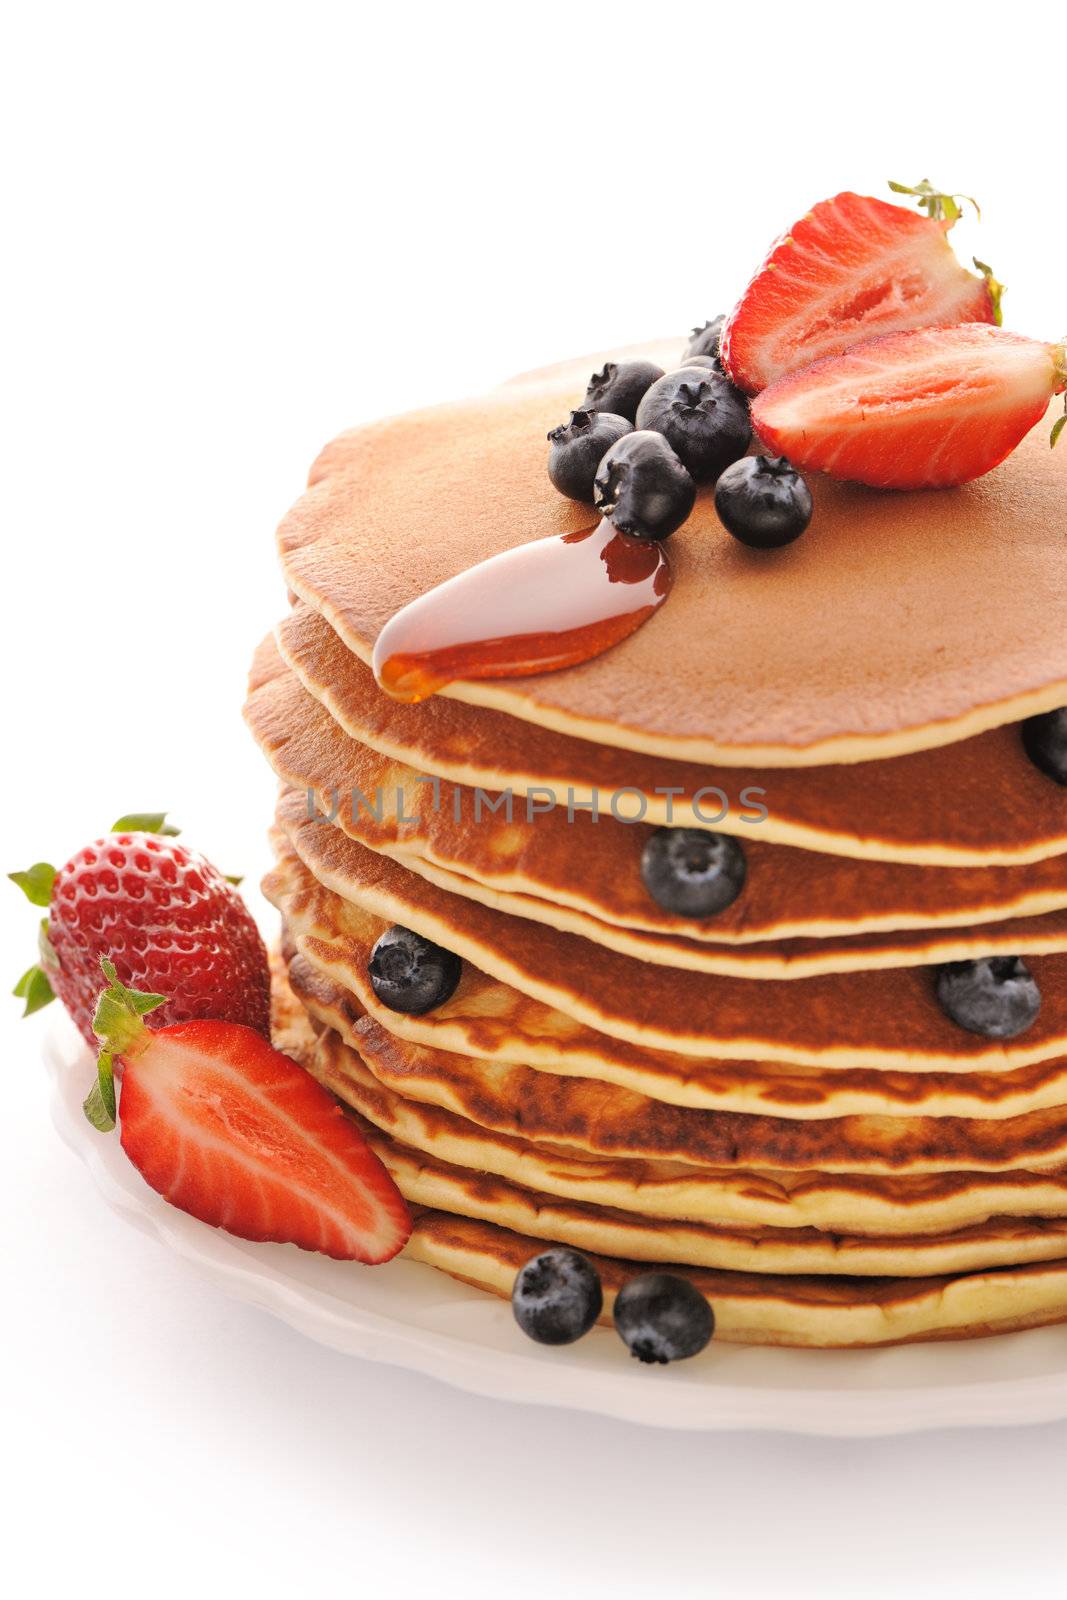 Pancakes with strawberry and blueberries by haveseen